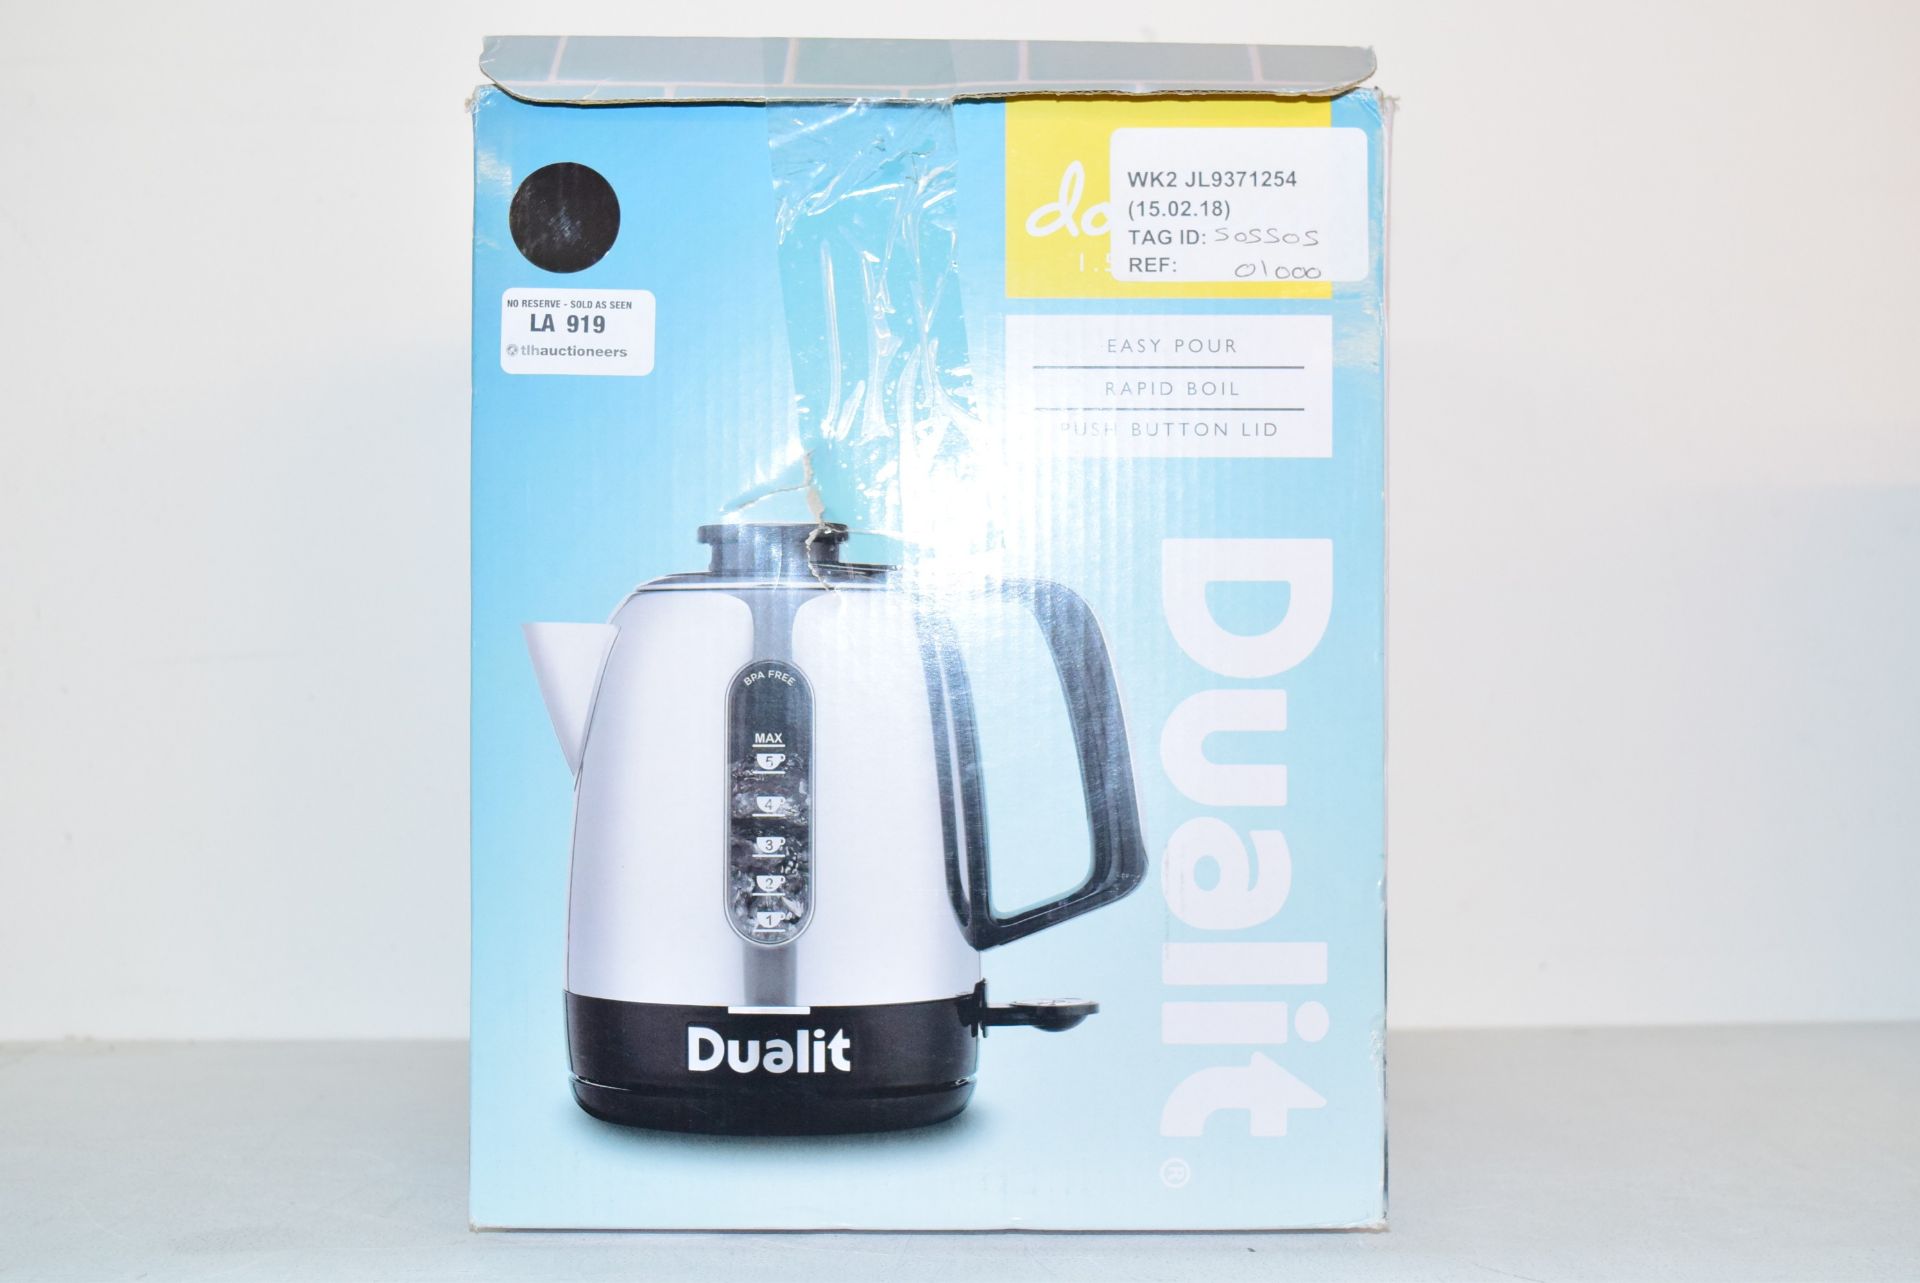 1 X BOXED DUALIT KETTLE RRP £100 15.02.18 505505 W919